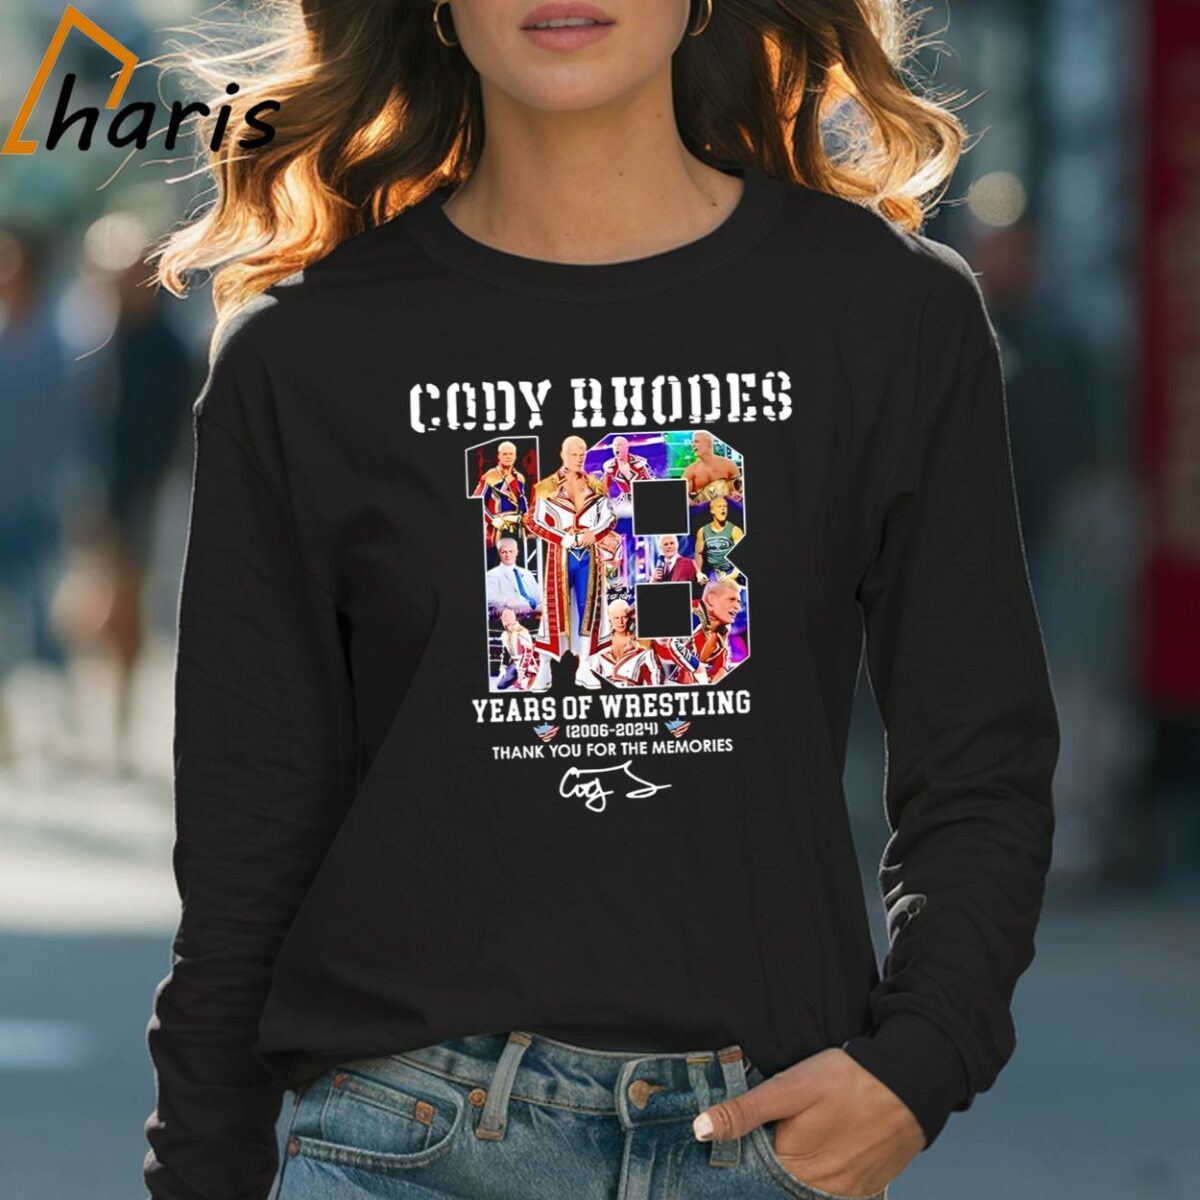 Cody Rhodes 18 Years Of Wrestling 2006 2024 Thank You For The Memories shirt 4 Long sleeve shirt